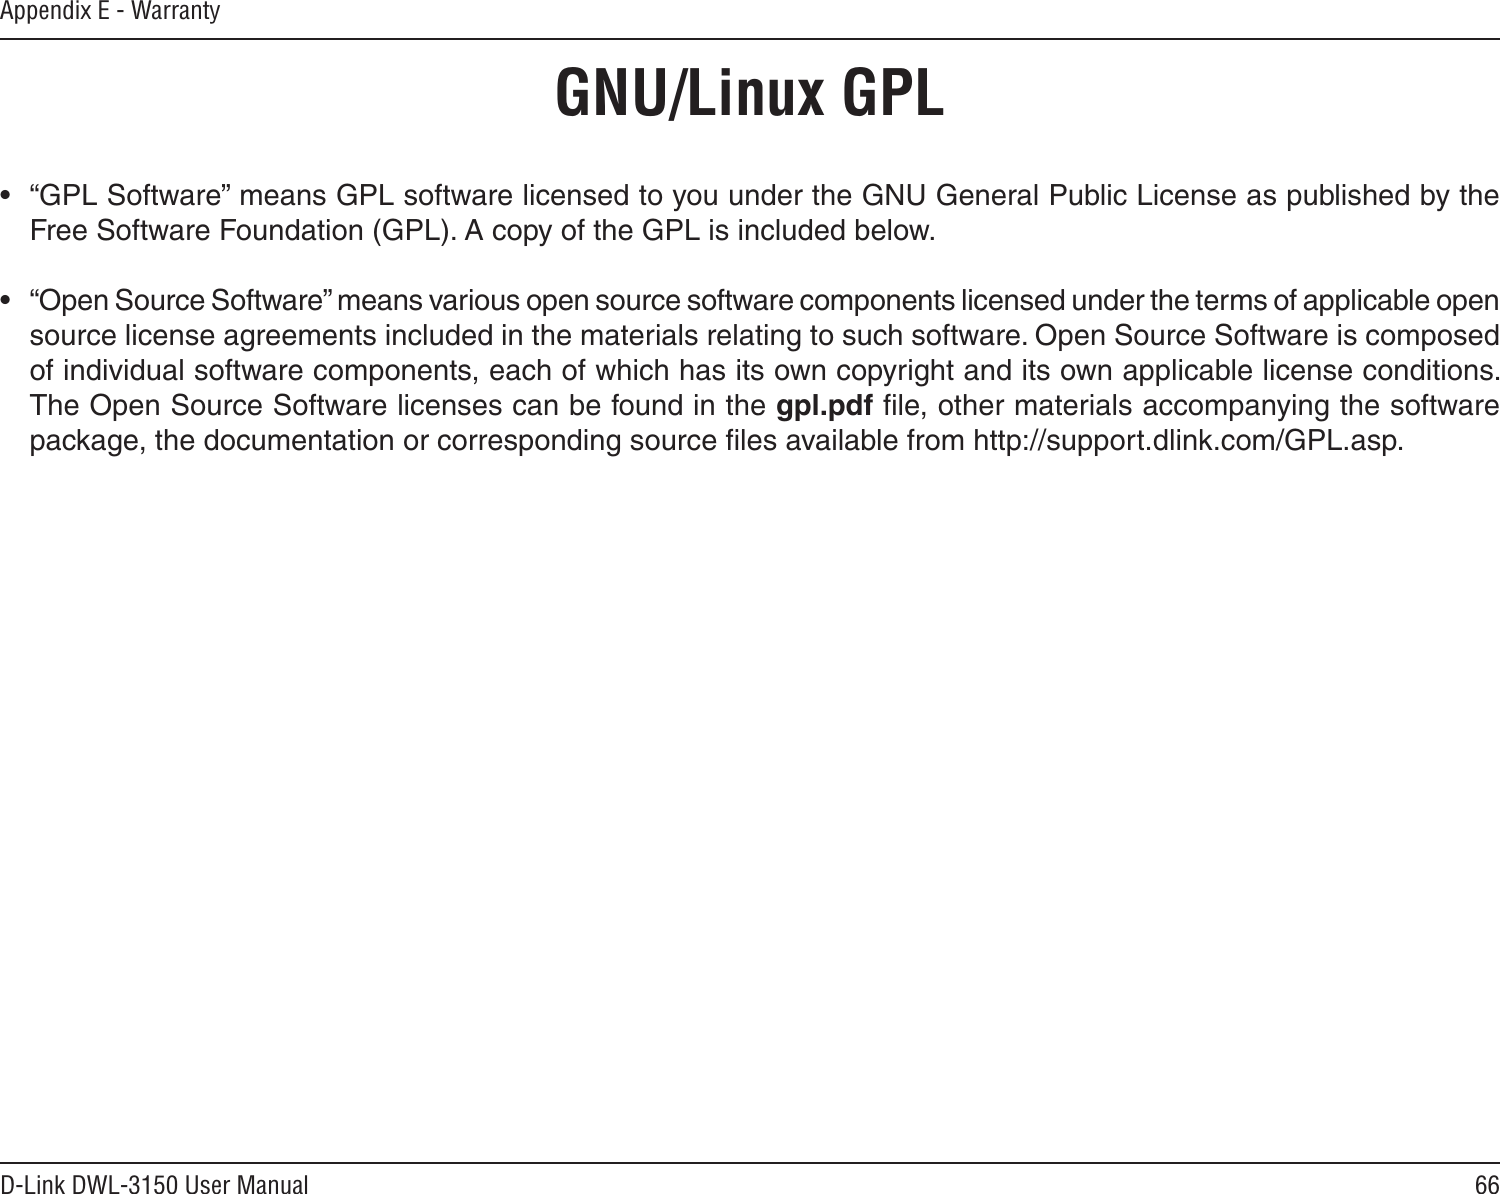 66D-Link DWL-3150 User ManualAppendix E - Warranty•  “GPL Software” means GPL software licensed to you under the GNU General Public License as published by the Free Software Foundation (GPL). A copy of the GPL is included below.•  “Open Source Software” means various open source software components licensed under the terms of applicable open source license agreements included in the materials relating to such software. Open Source Software is composed of individual software components, each of which has its own copyright and its own applicable license conditions. The Open Source Software licenses can be found in the gpl.pdf ﬁle, other materials accompanying the software package, the documentation or corresponding source ﬁles available from http://support.dlink.com/GPL.asp.GNU/Linux GPL